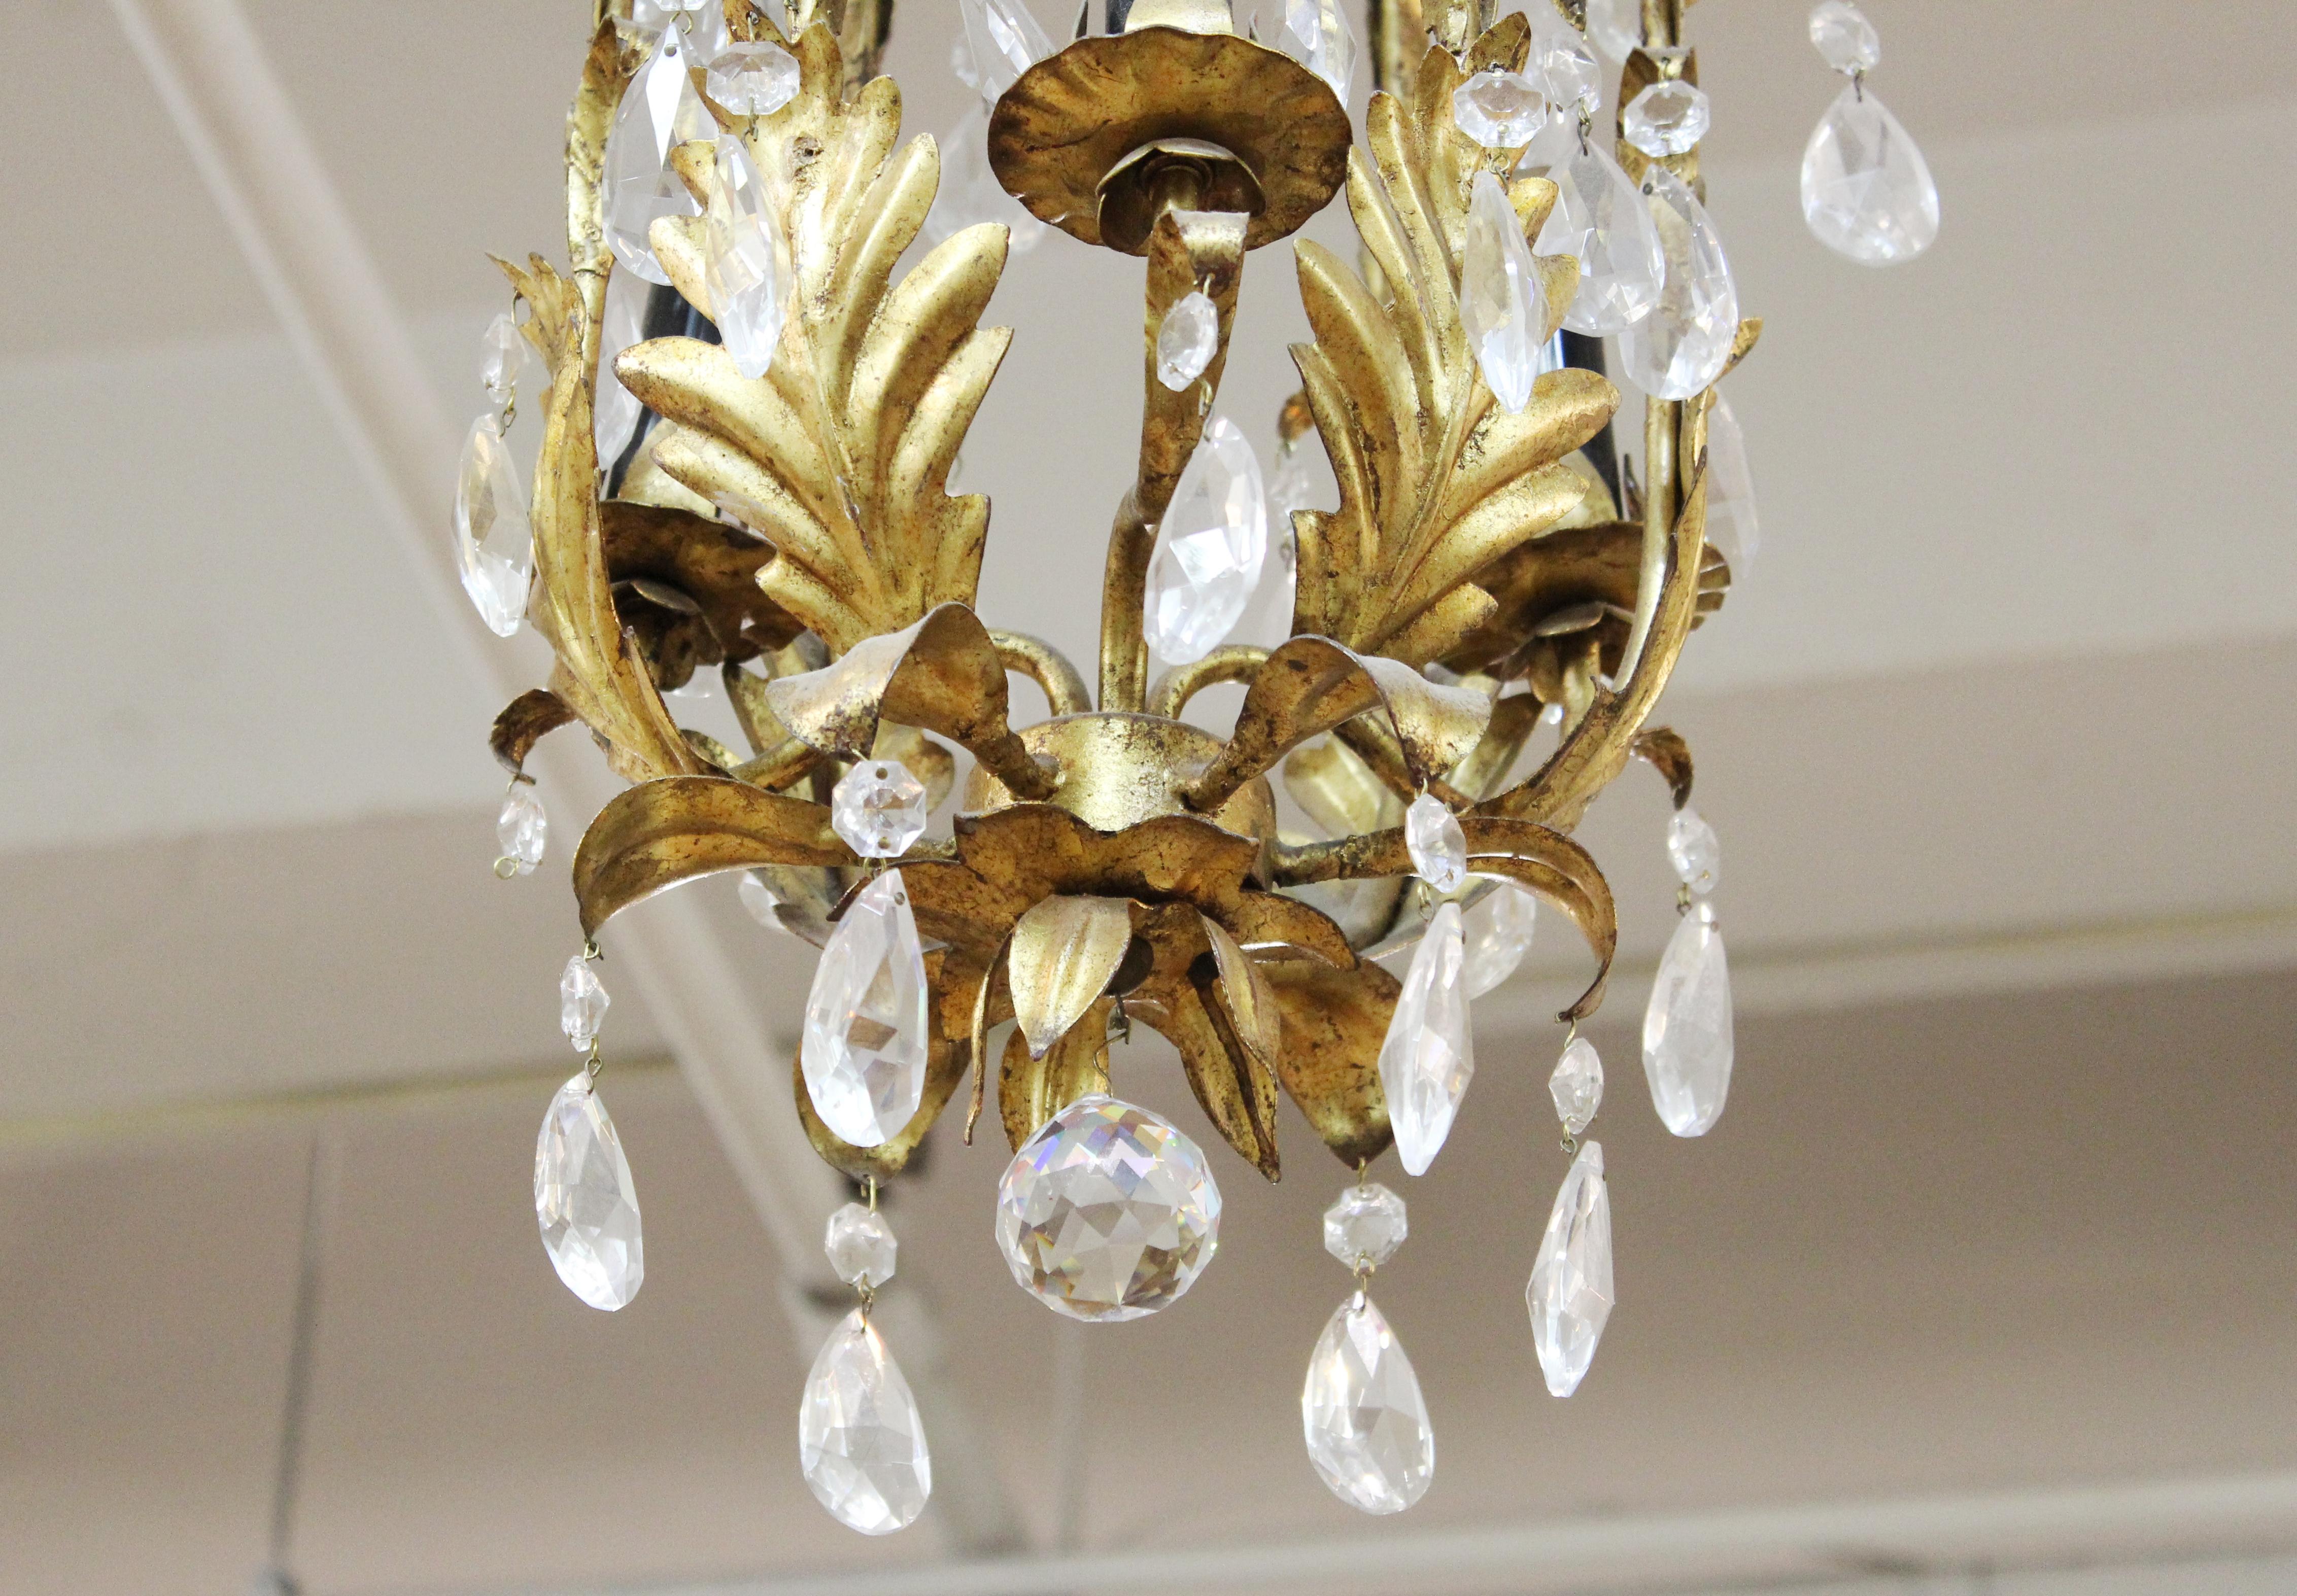 20th Century Italian Hollywood Regency Diminutive Gilt Tole Chandelier with Crystal Droplets For Sale